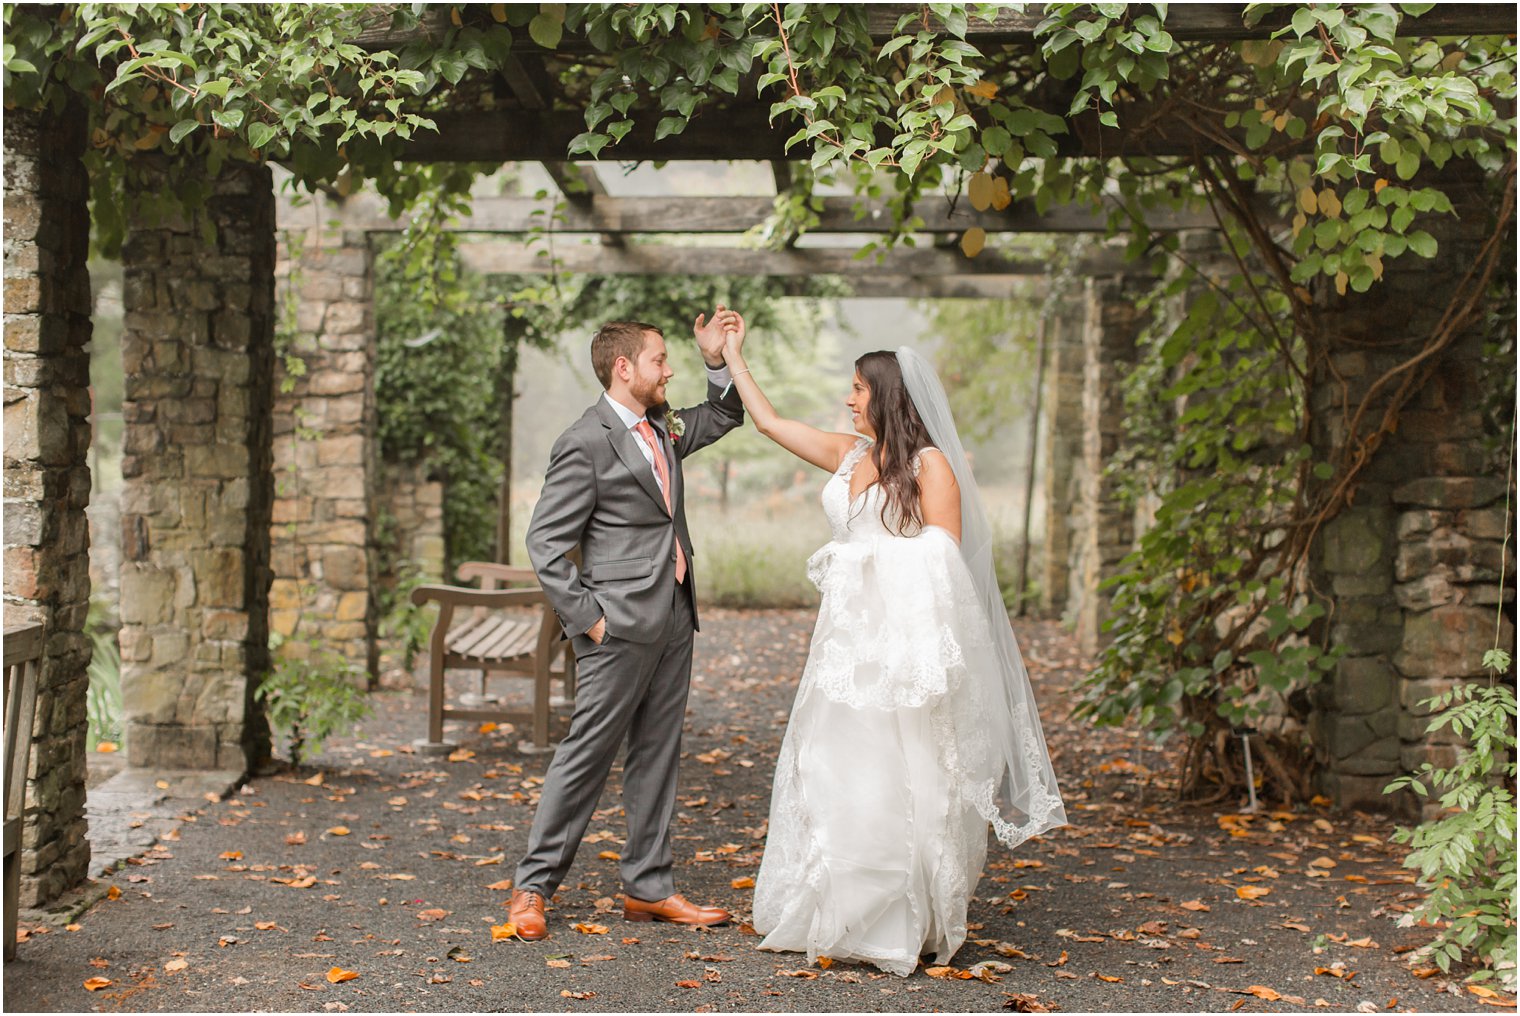 dancing wedding portraits at Olde Mill Inn garden photographed by Idalia Photography